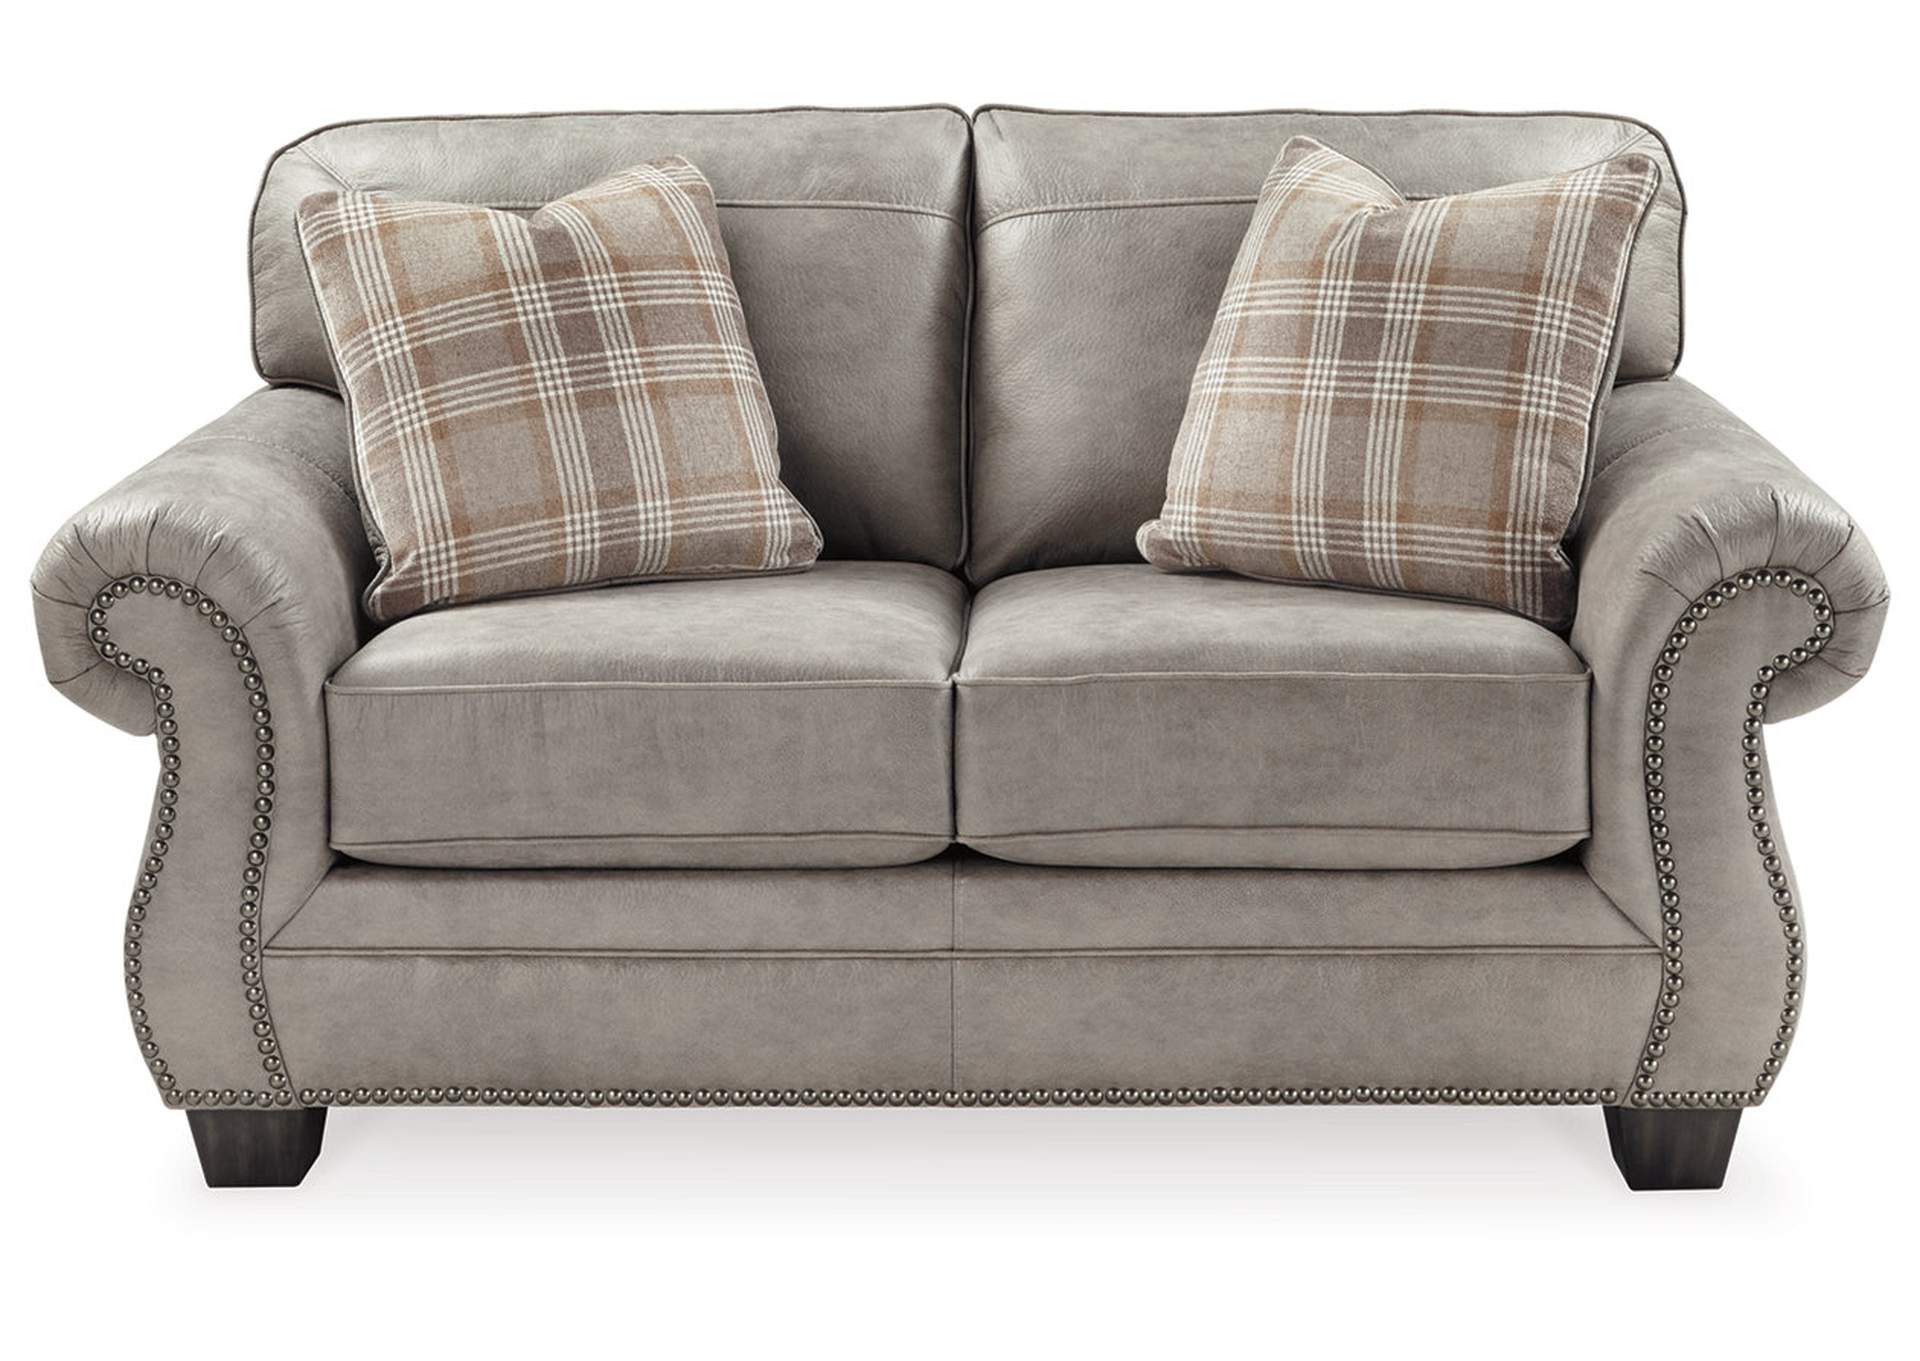 Olsberg Loveseat, Chair, and Ottoman,Signature Design By Ashley